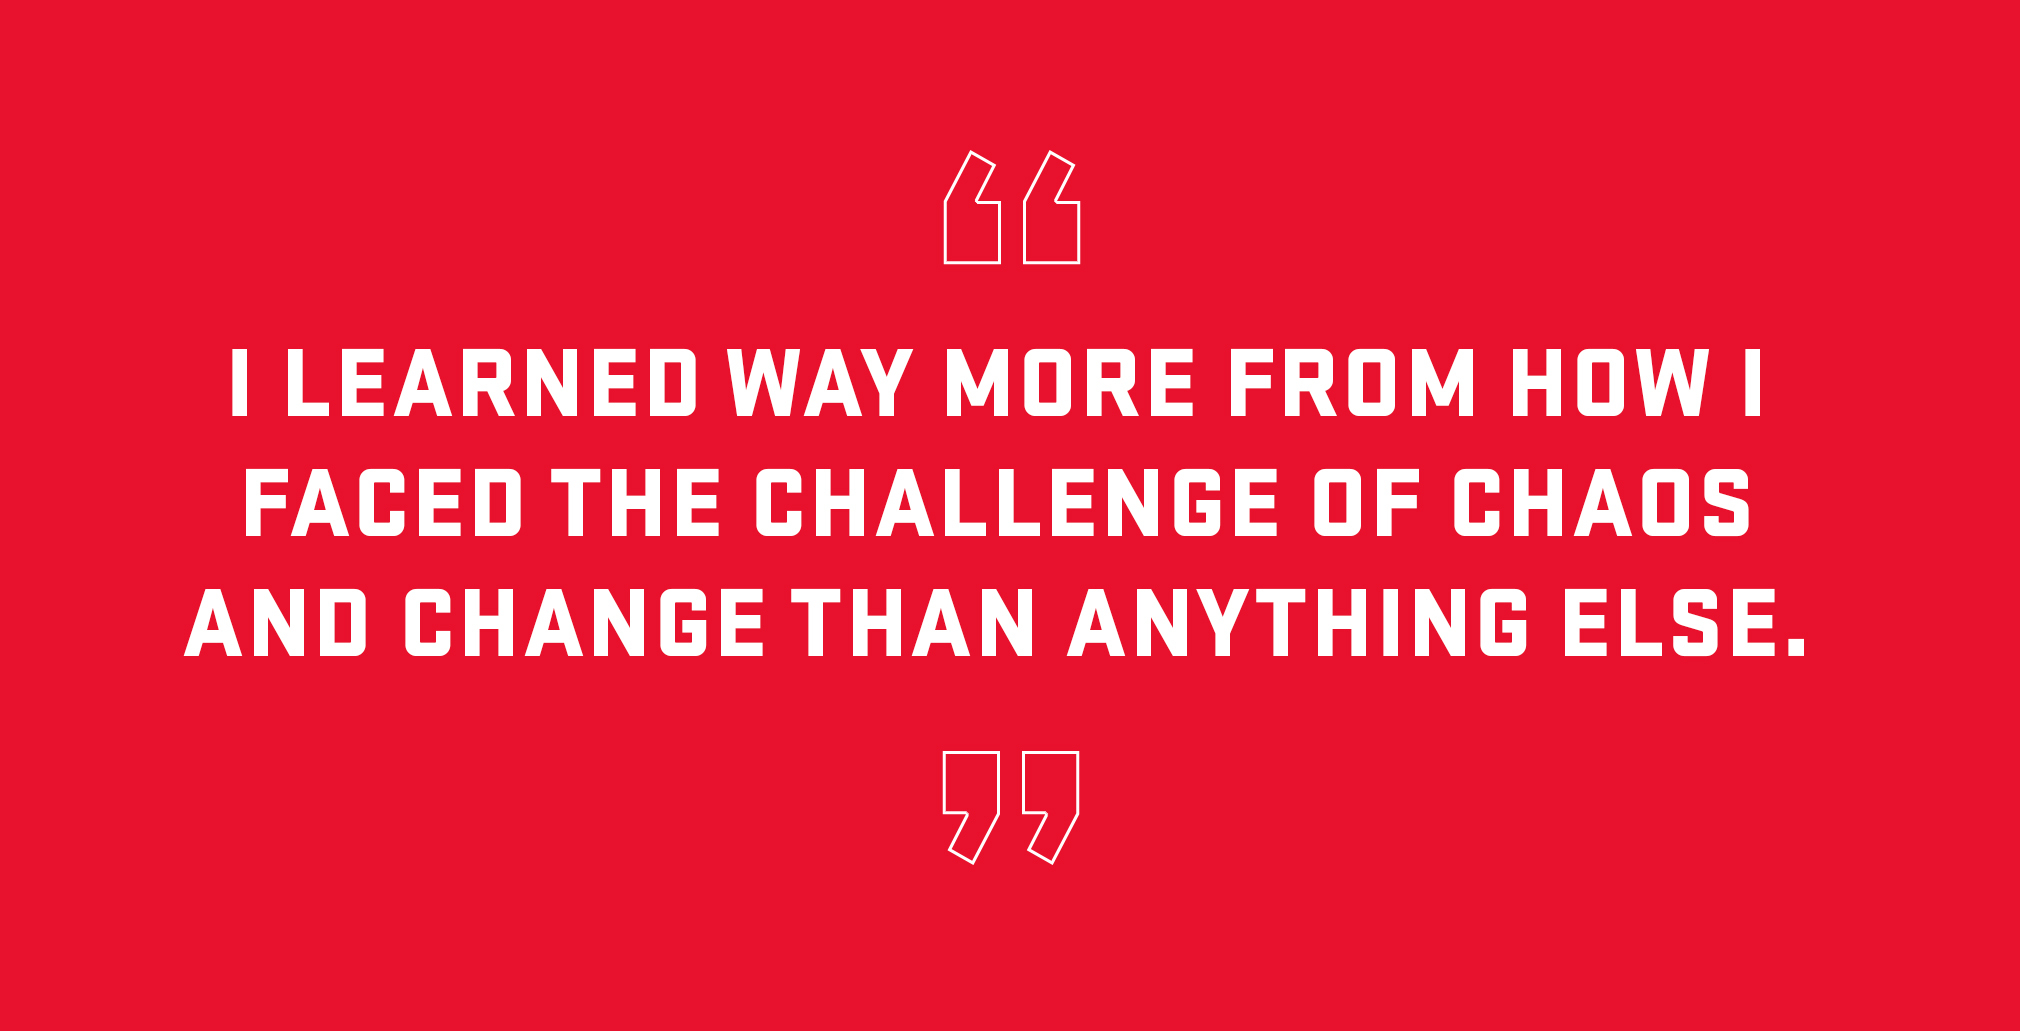 Block quote: I learned way more from how I faced the challenge of chaos and change than anything else. 